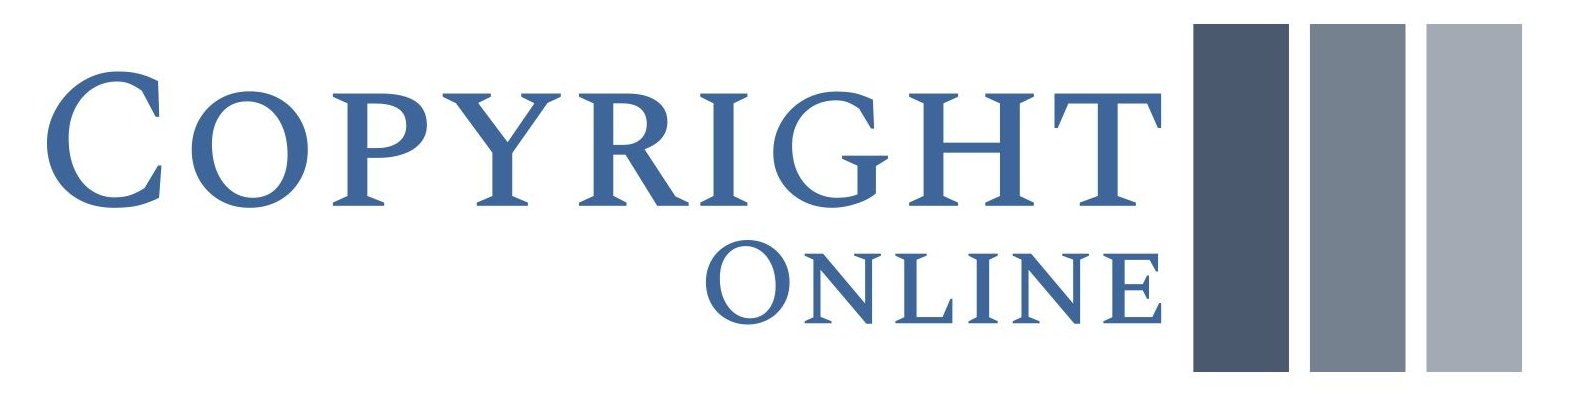 Copyright Online - An Agency of the Department of Commerce